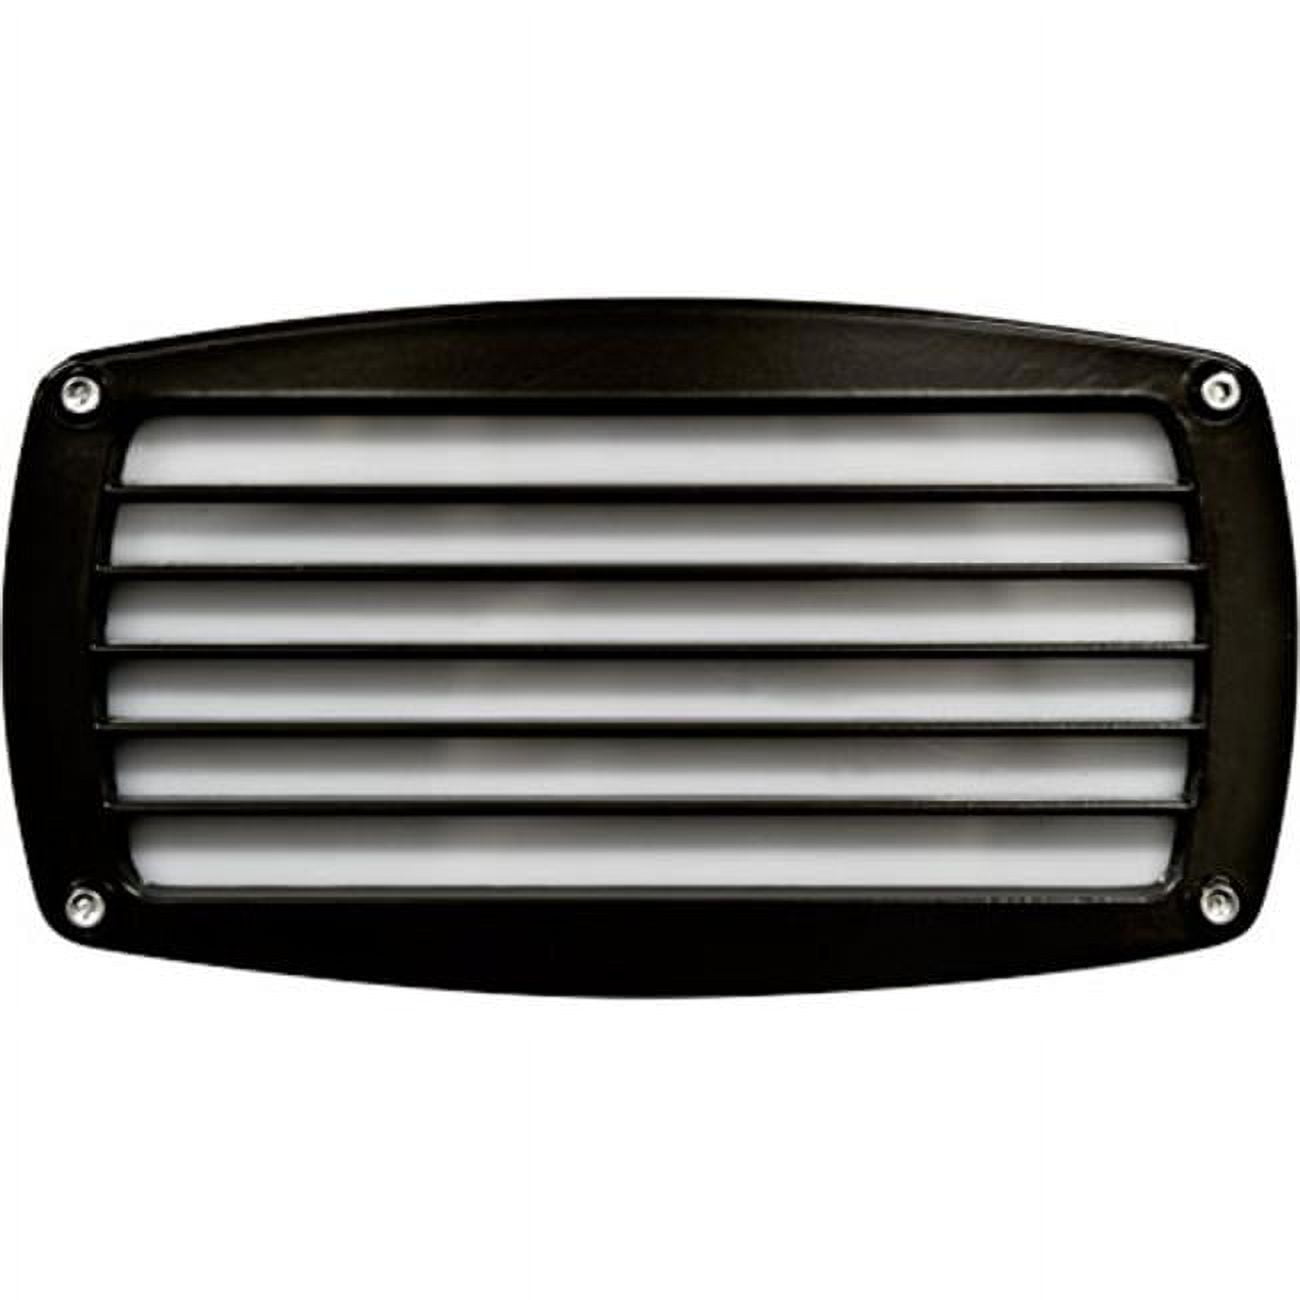 Picture of Dabmar Lighting DSL1015-B Recessed Louvered Brick, Step & Wall Light, Black - 5 x 9 x 3.75 in.